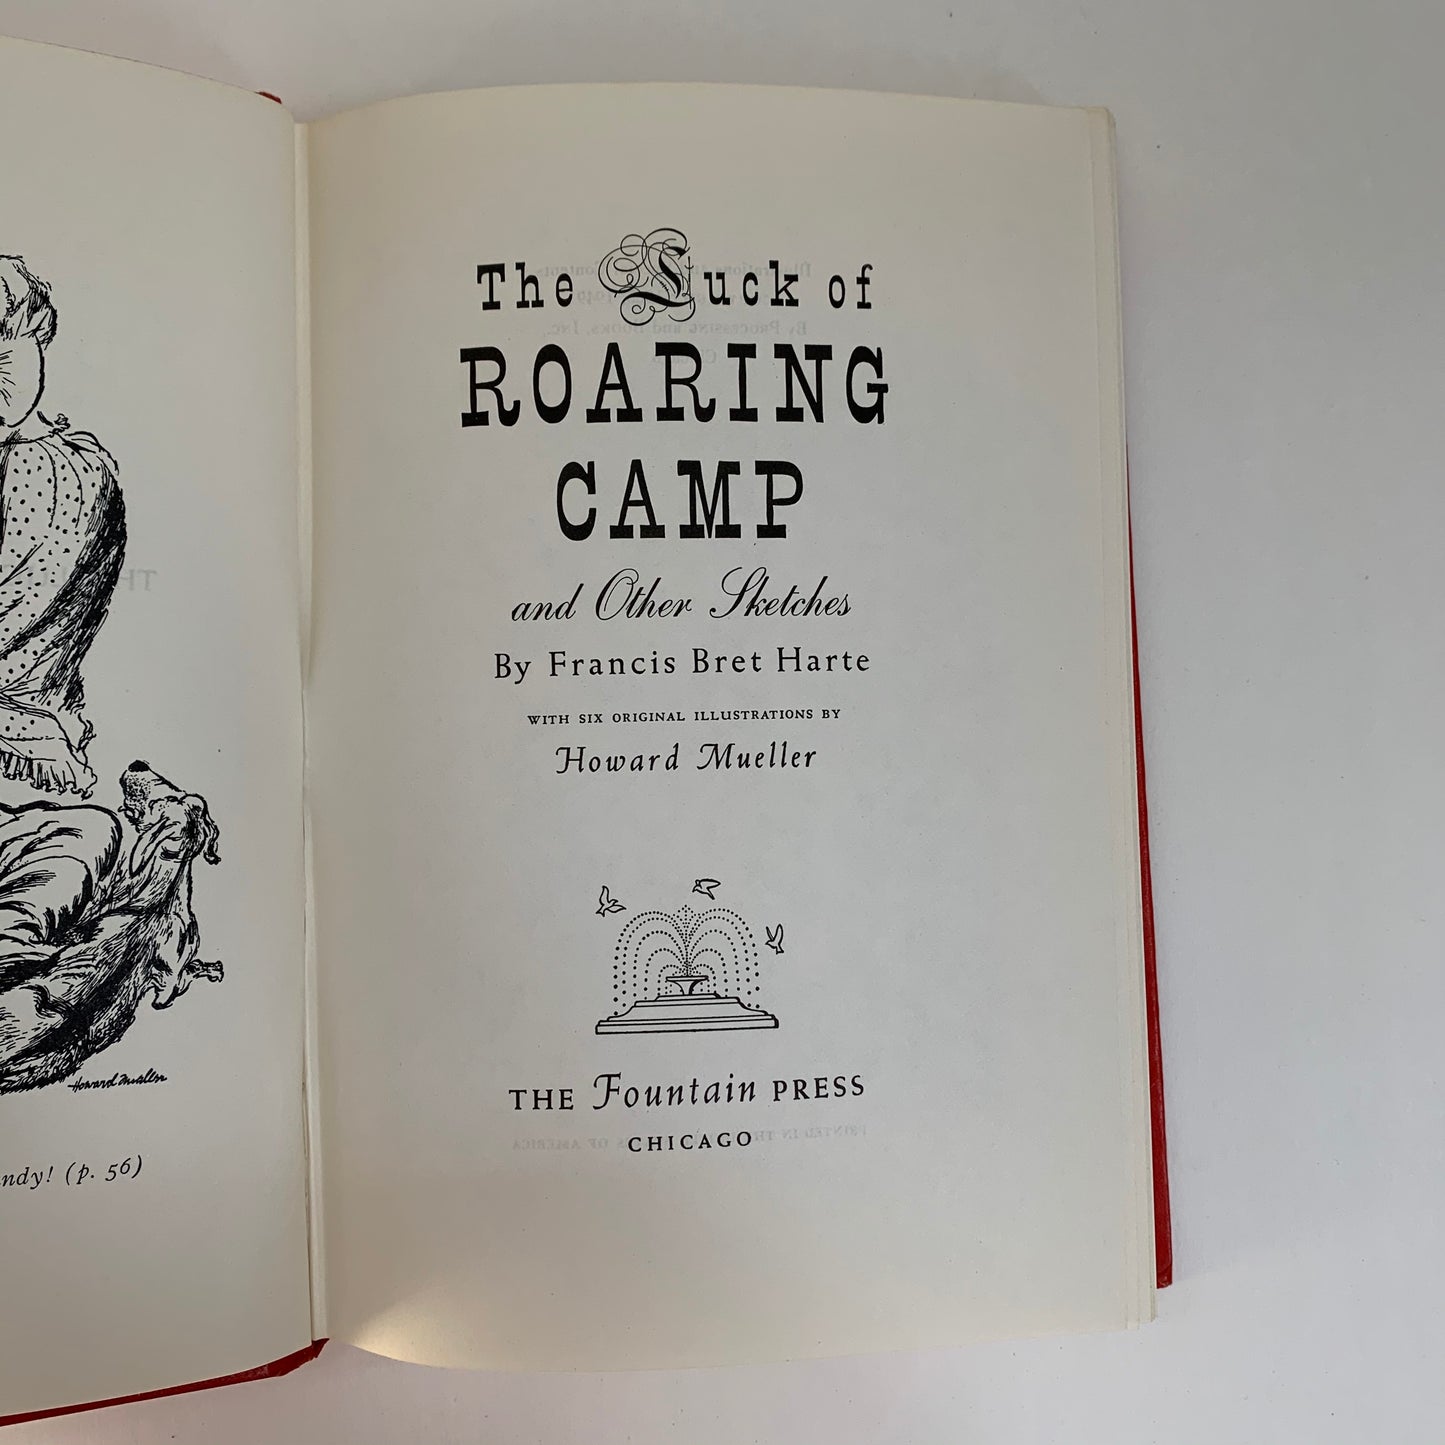 Vintage Book- The of Roaring Camp by Francis Bret Harte